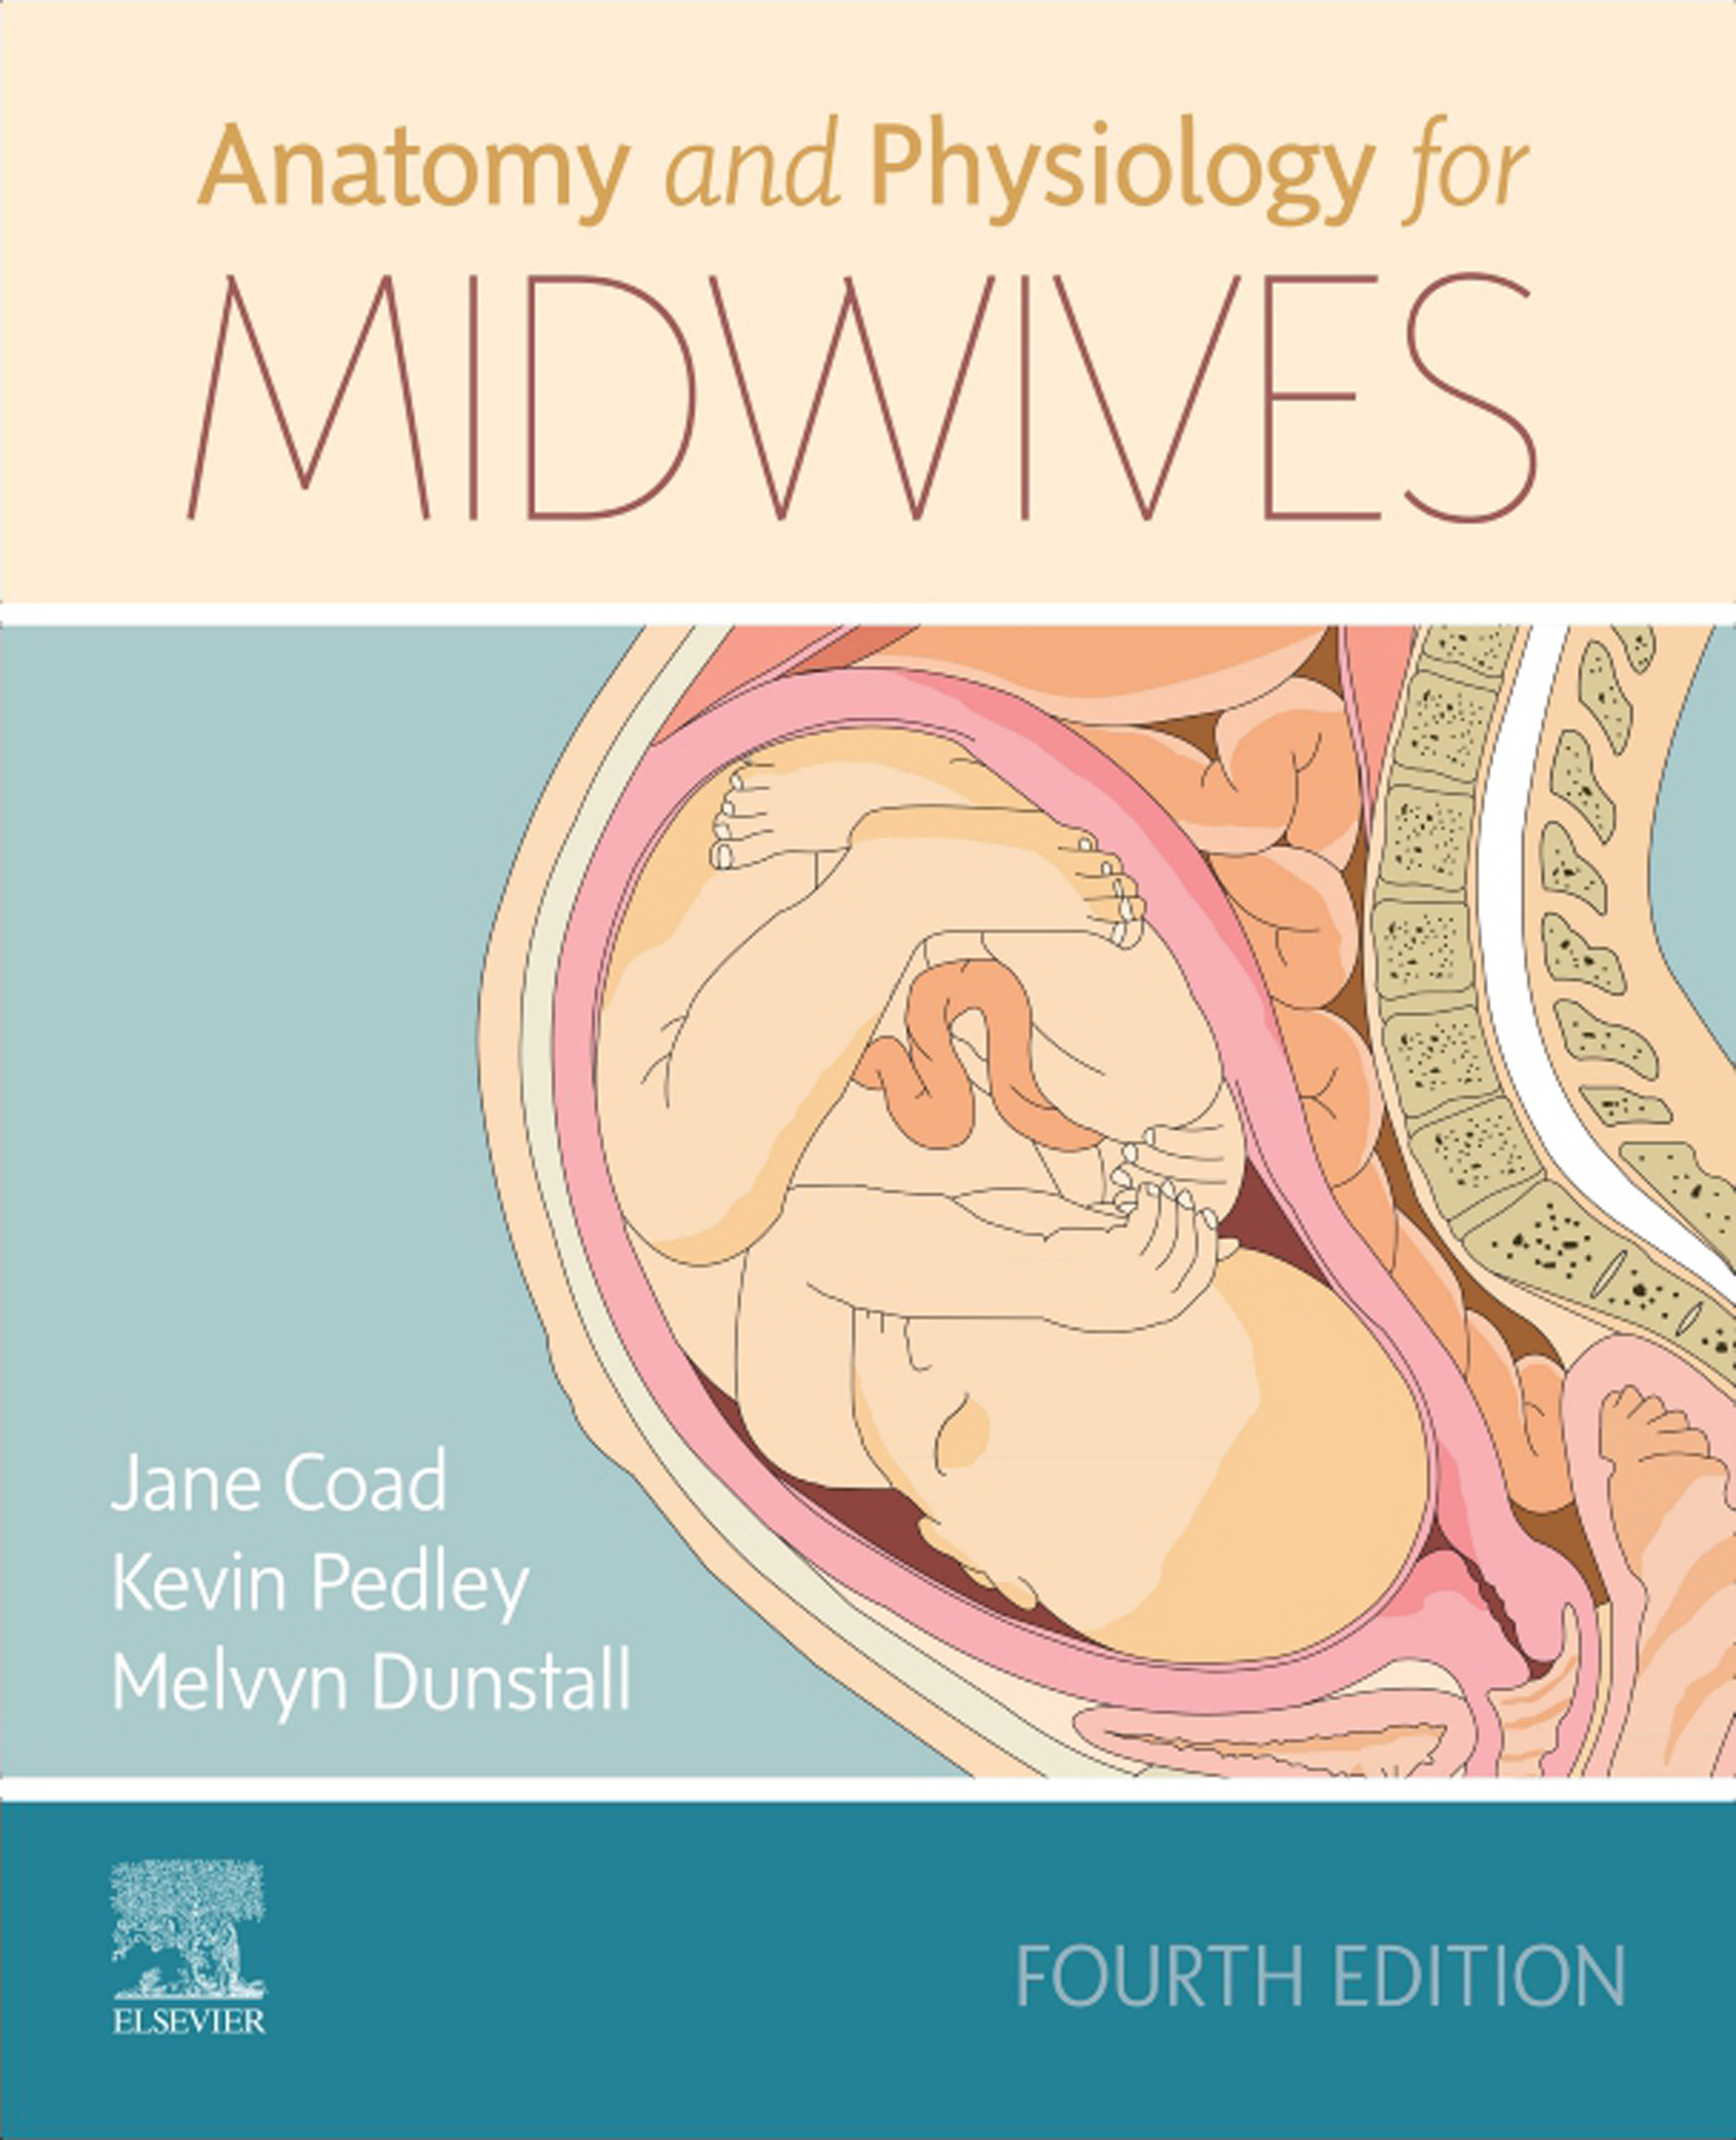 Anatomy and Physiology for Midwives E-Book